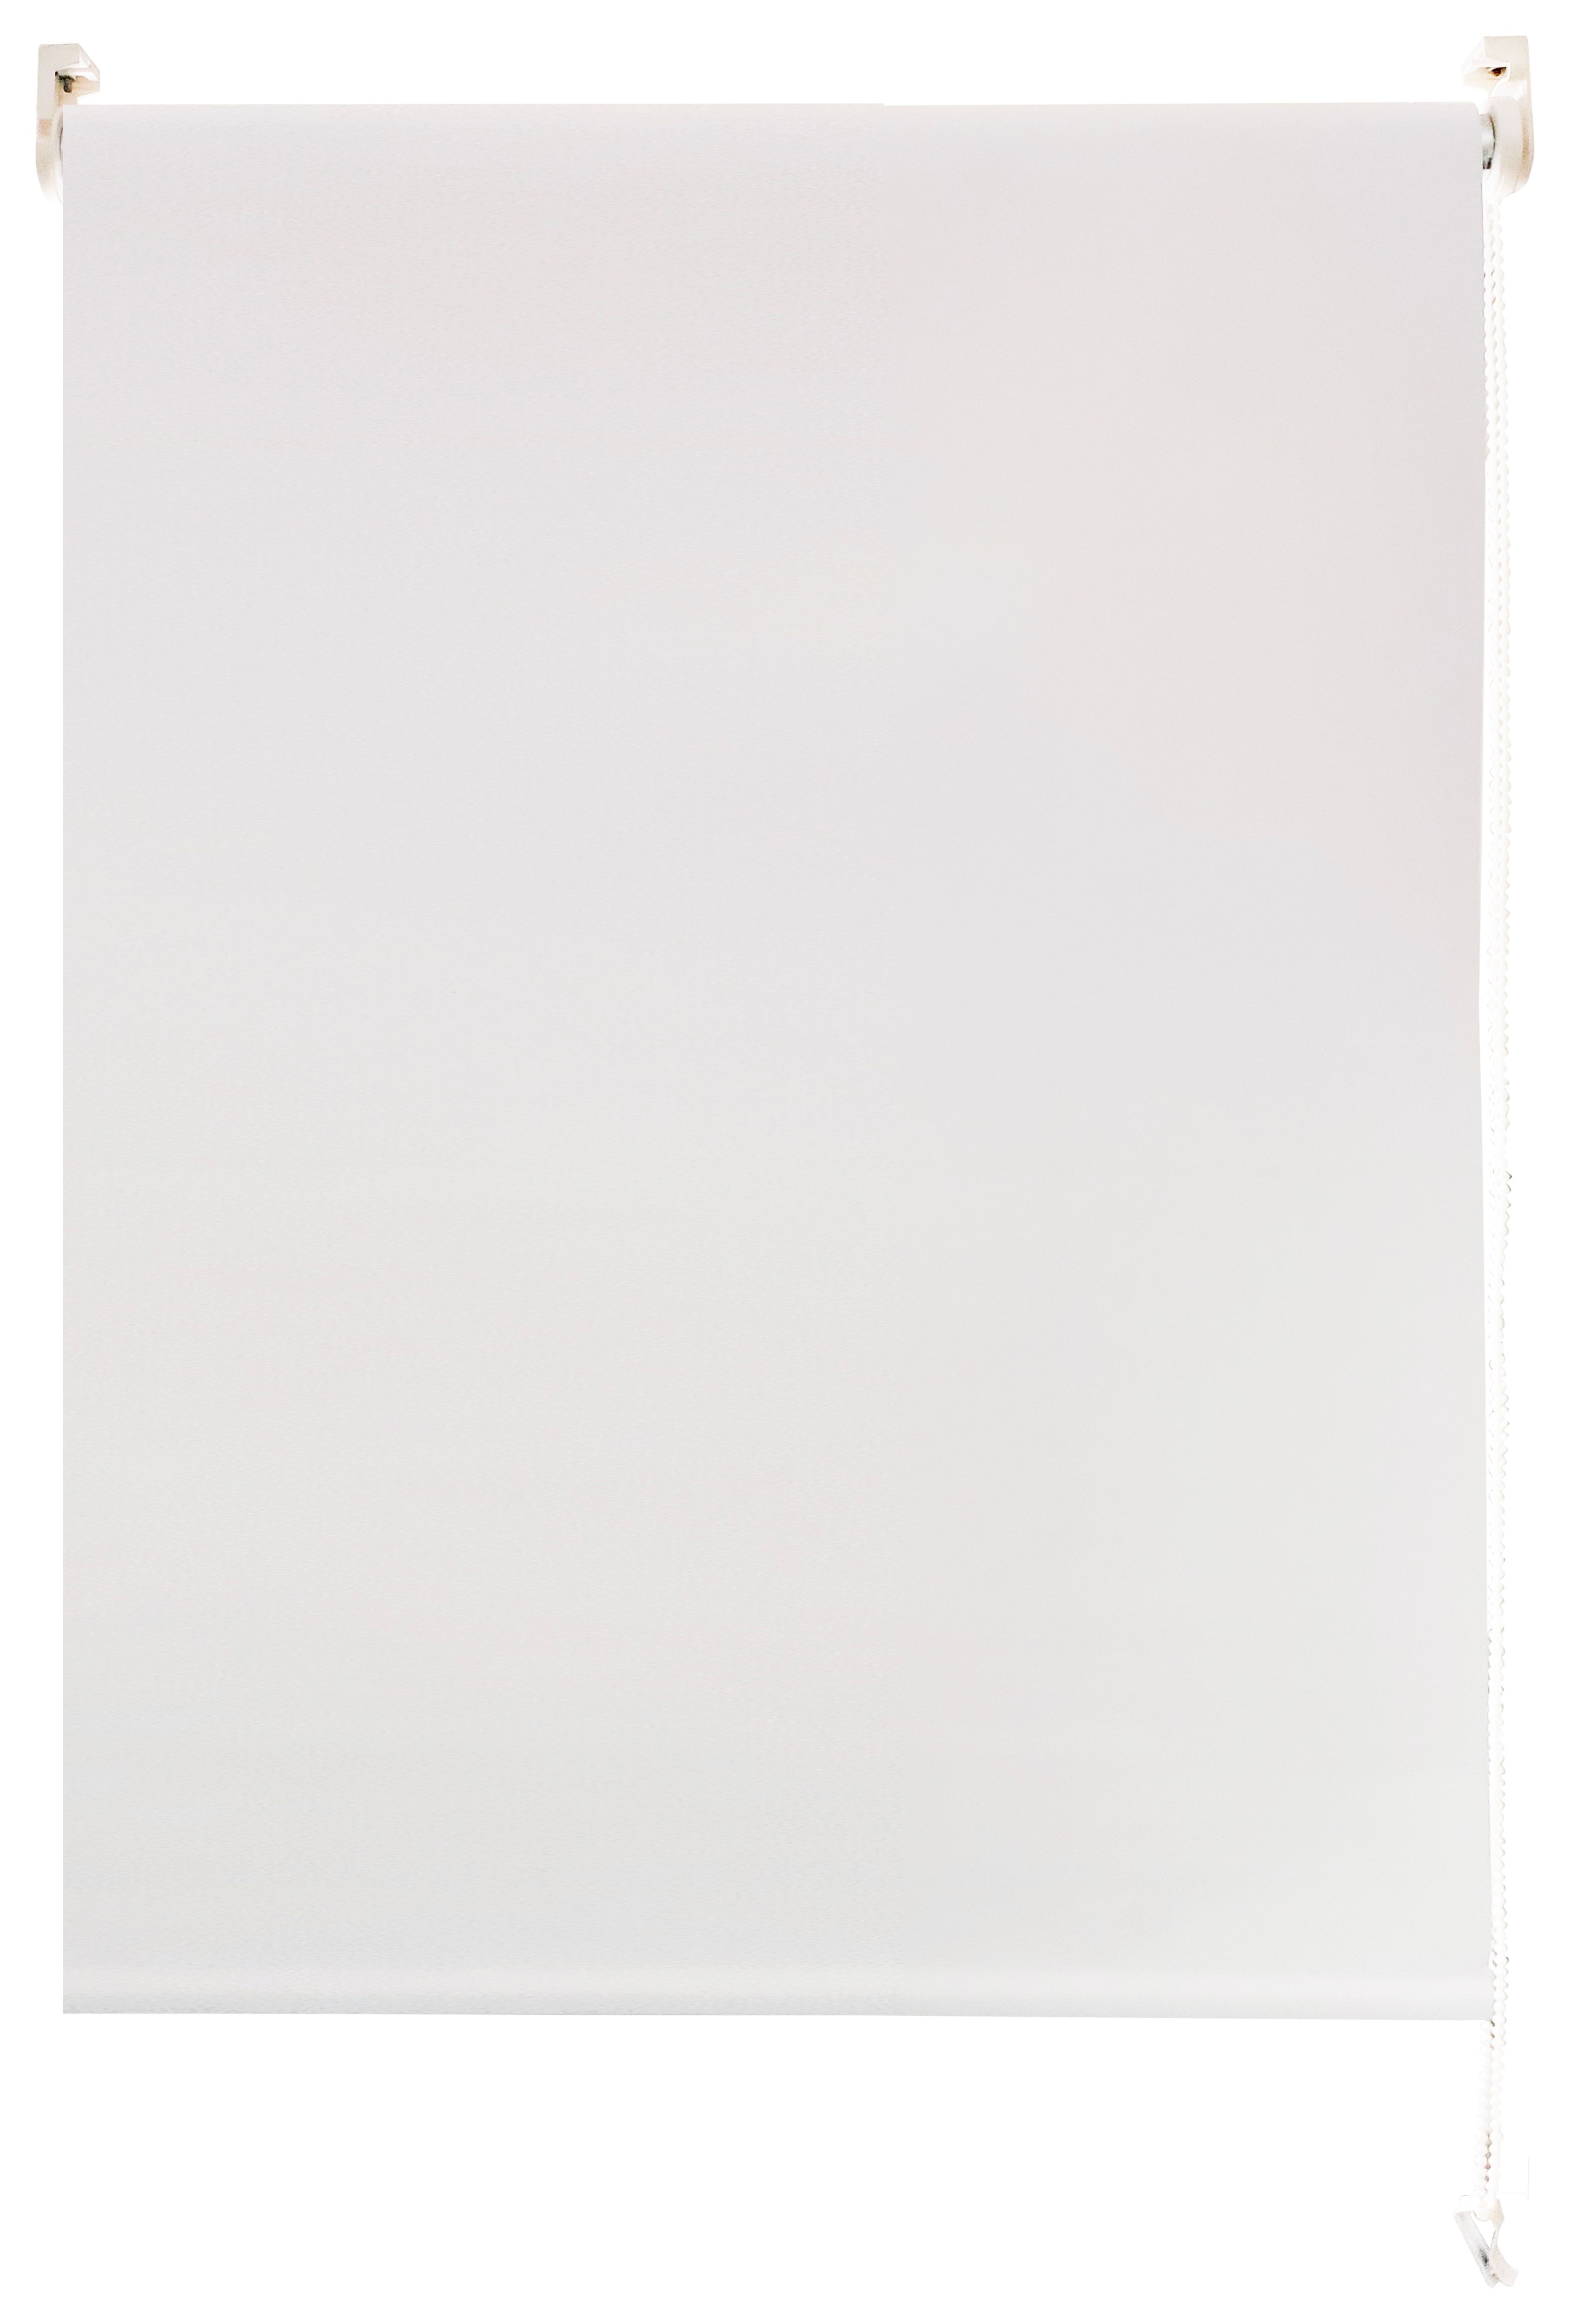 Image of Wickes Blackout Roller Blind White 150x170cm